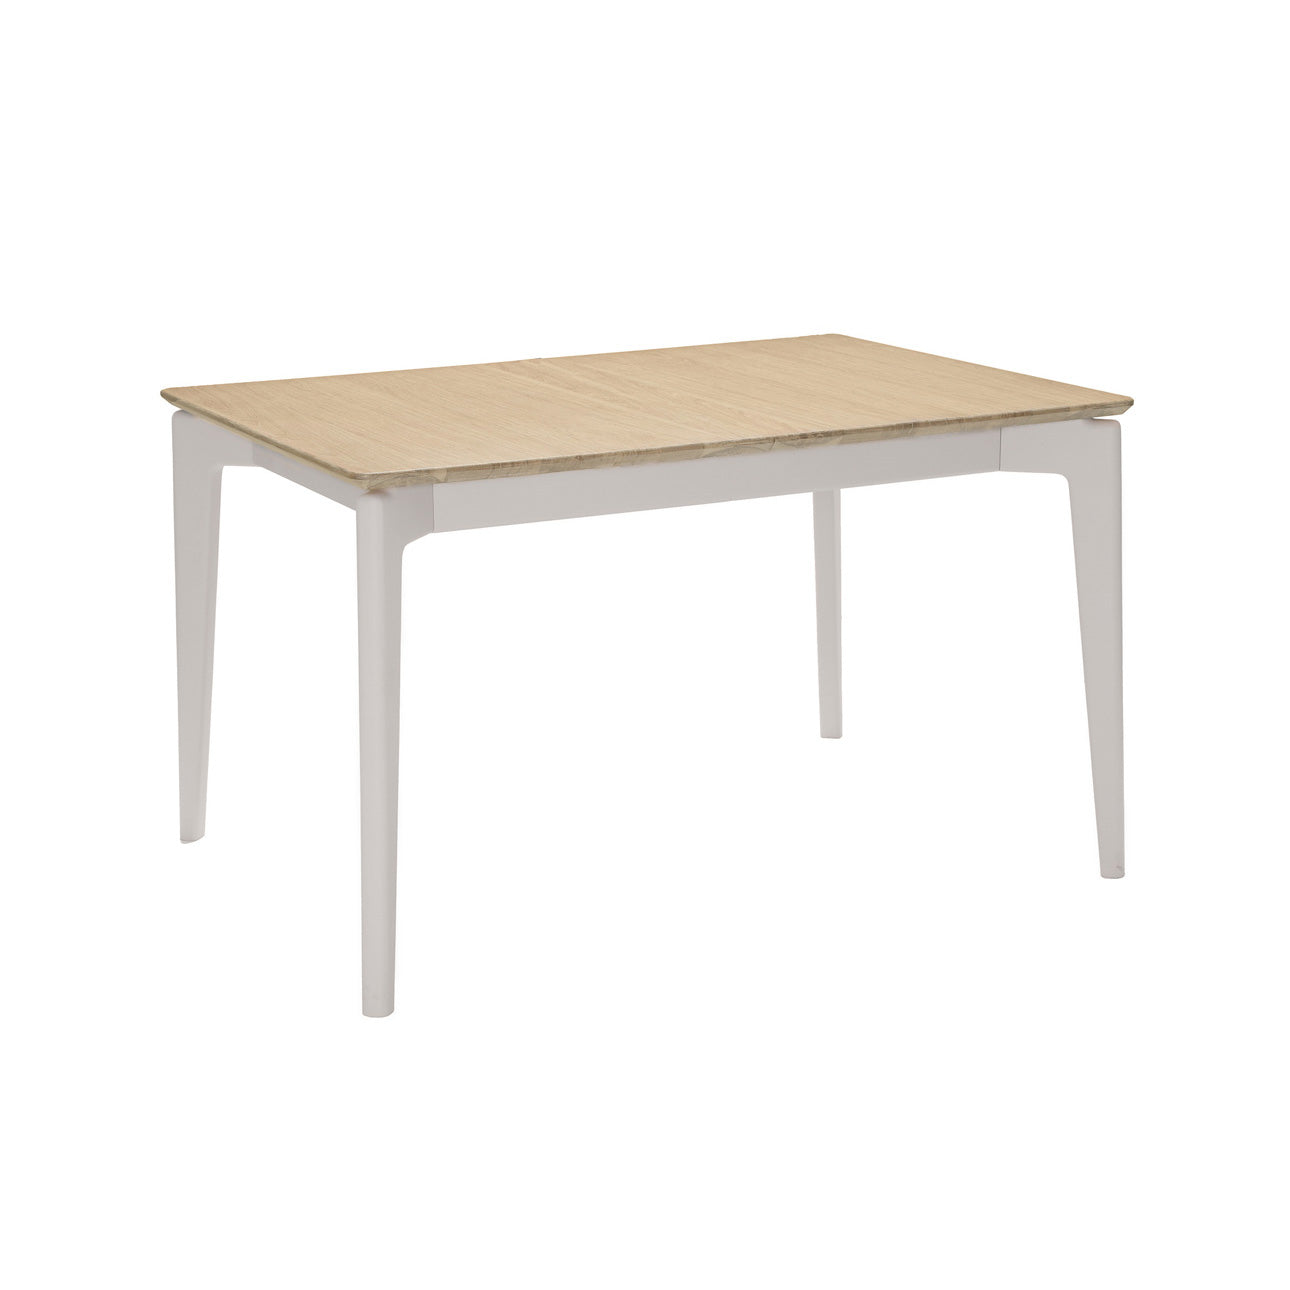 Serenity Dining Table 1650 Extending- Cashmere Oak